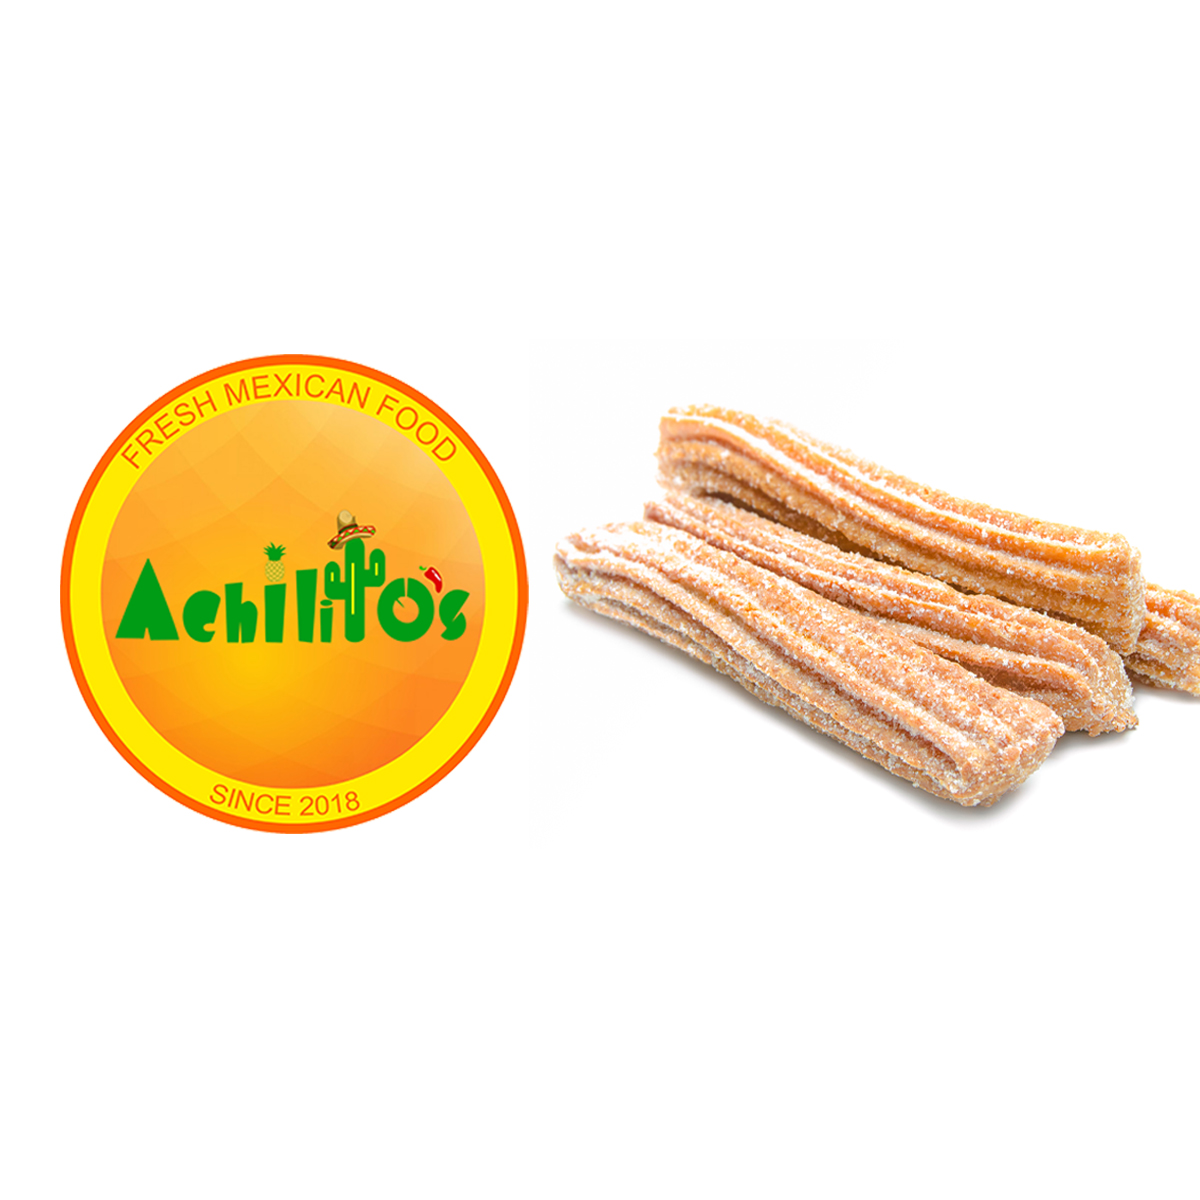 Free churros with any purchase at Achilito's Taqueria